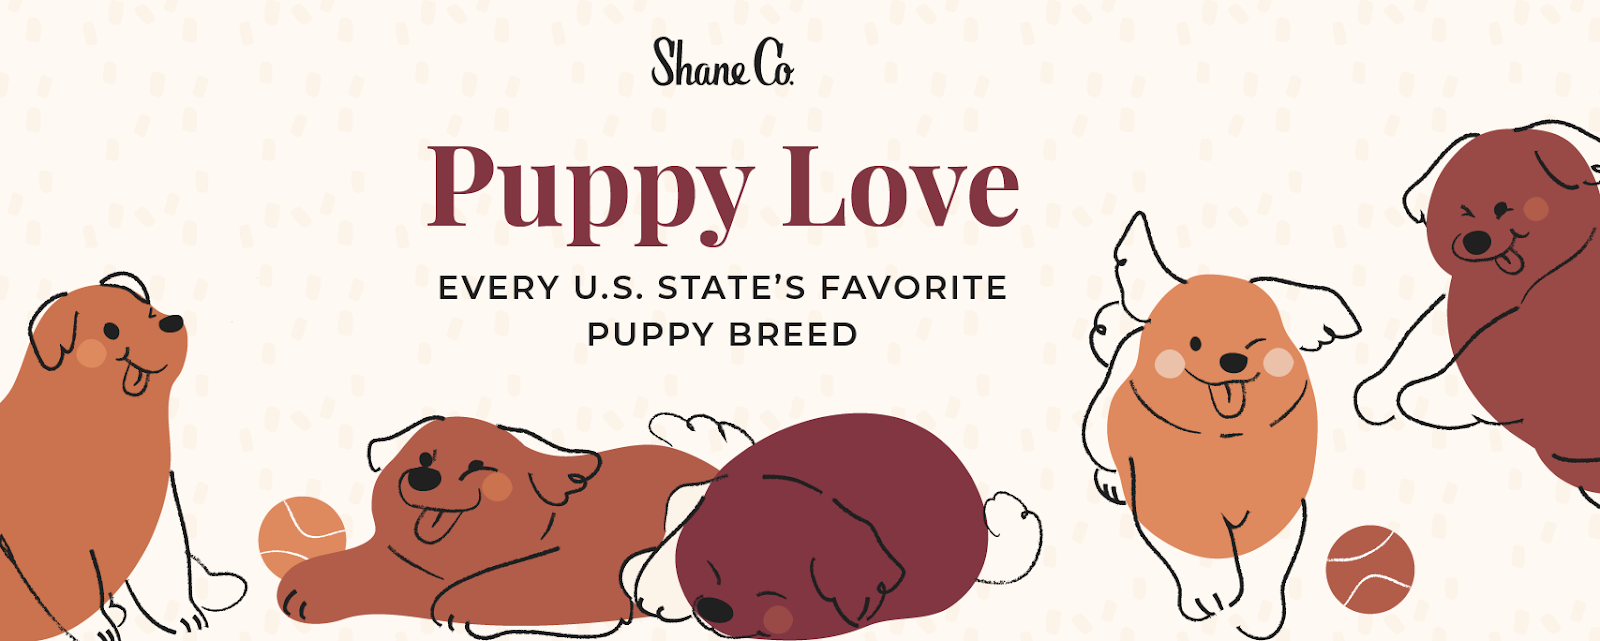 Title graphic for “Every U.S. State’s Favorite Puppy Breed”